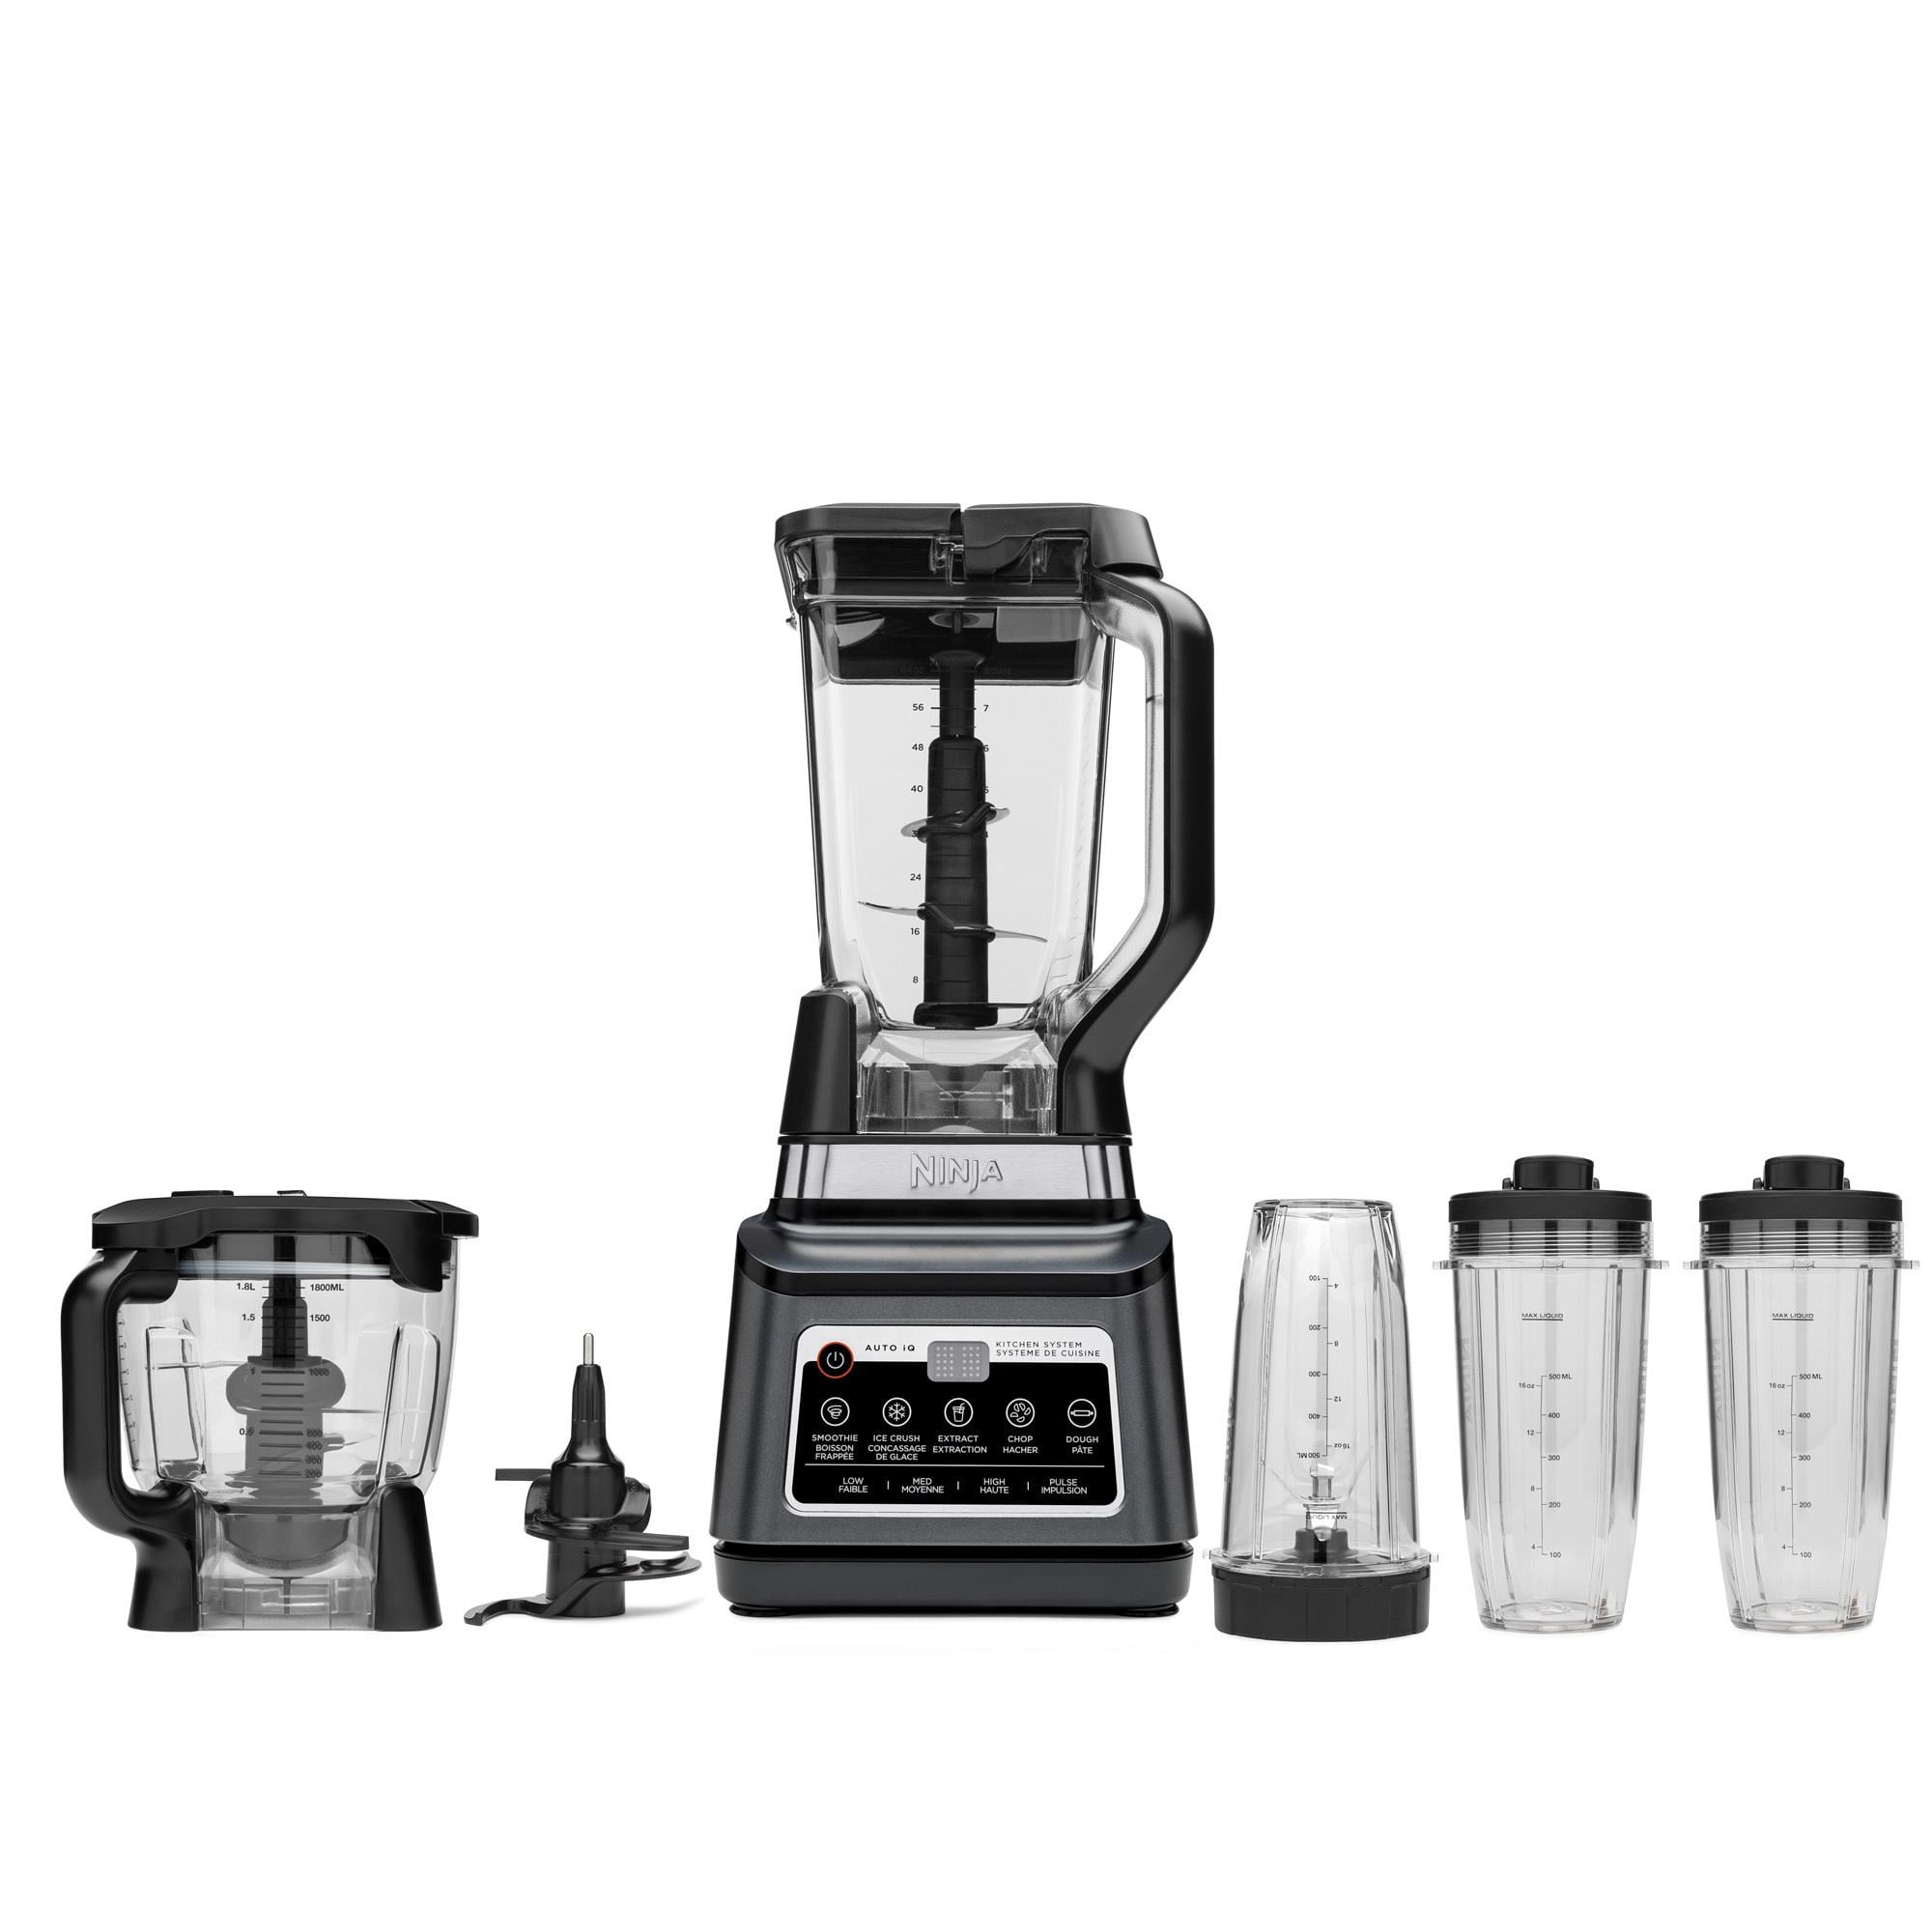 Ninja BN801 Professional Plus Kitchen System, 1400 WP, 5 Functions For  Smoothies, Chopping, Dough & More With Auto IQ, 72-Oz. Blender Pitcher, 64